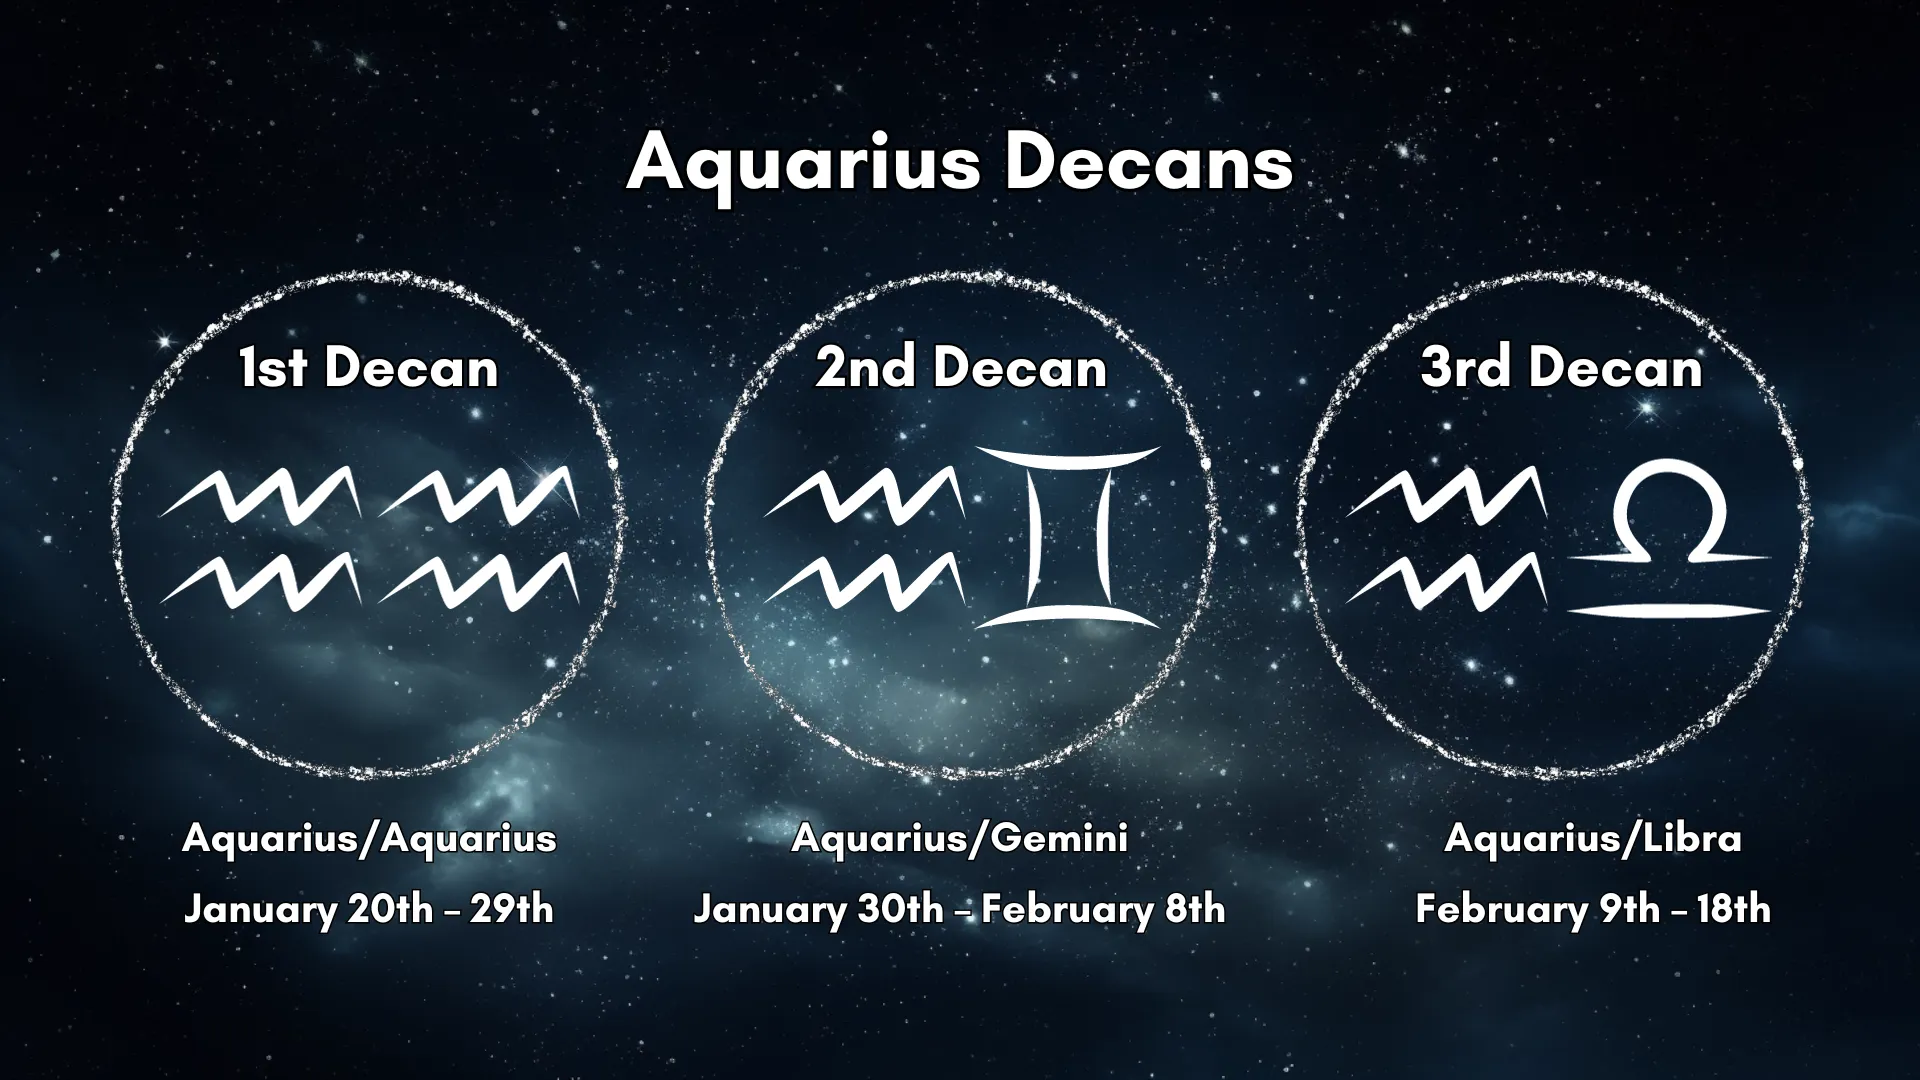 The Aquarius Decans are laid out in a chart that is easy to understand.